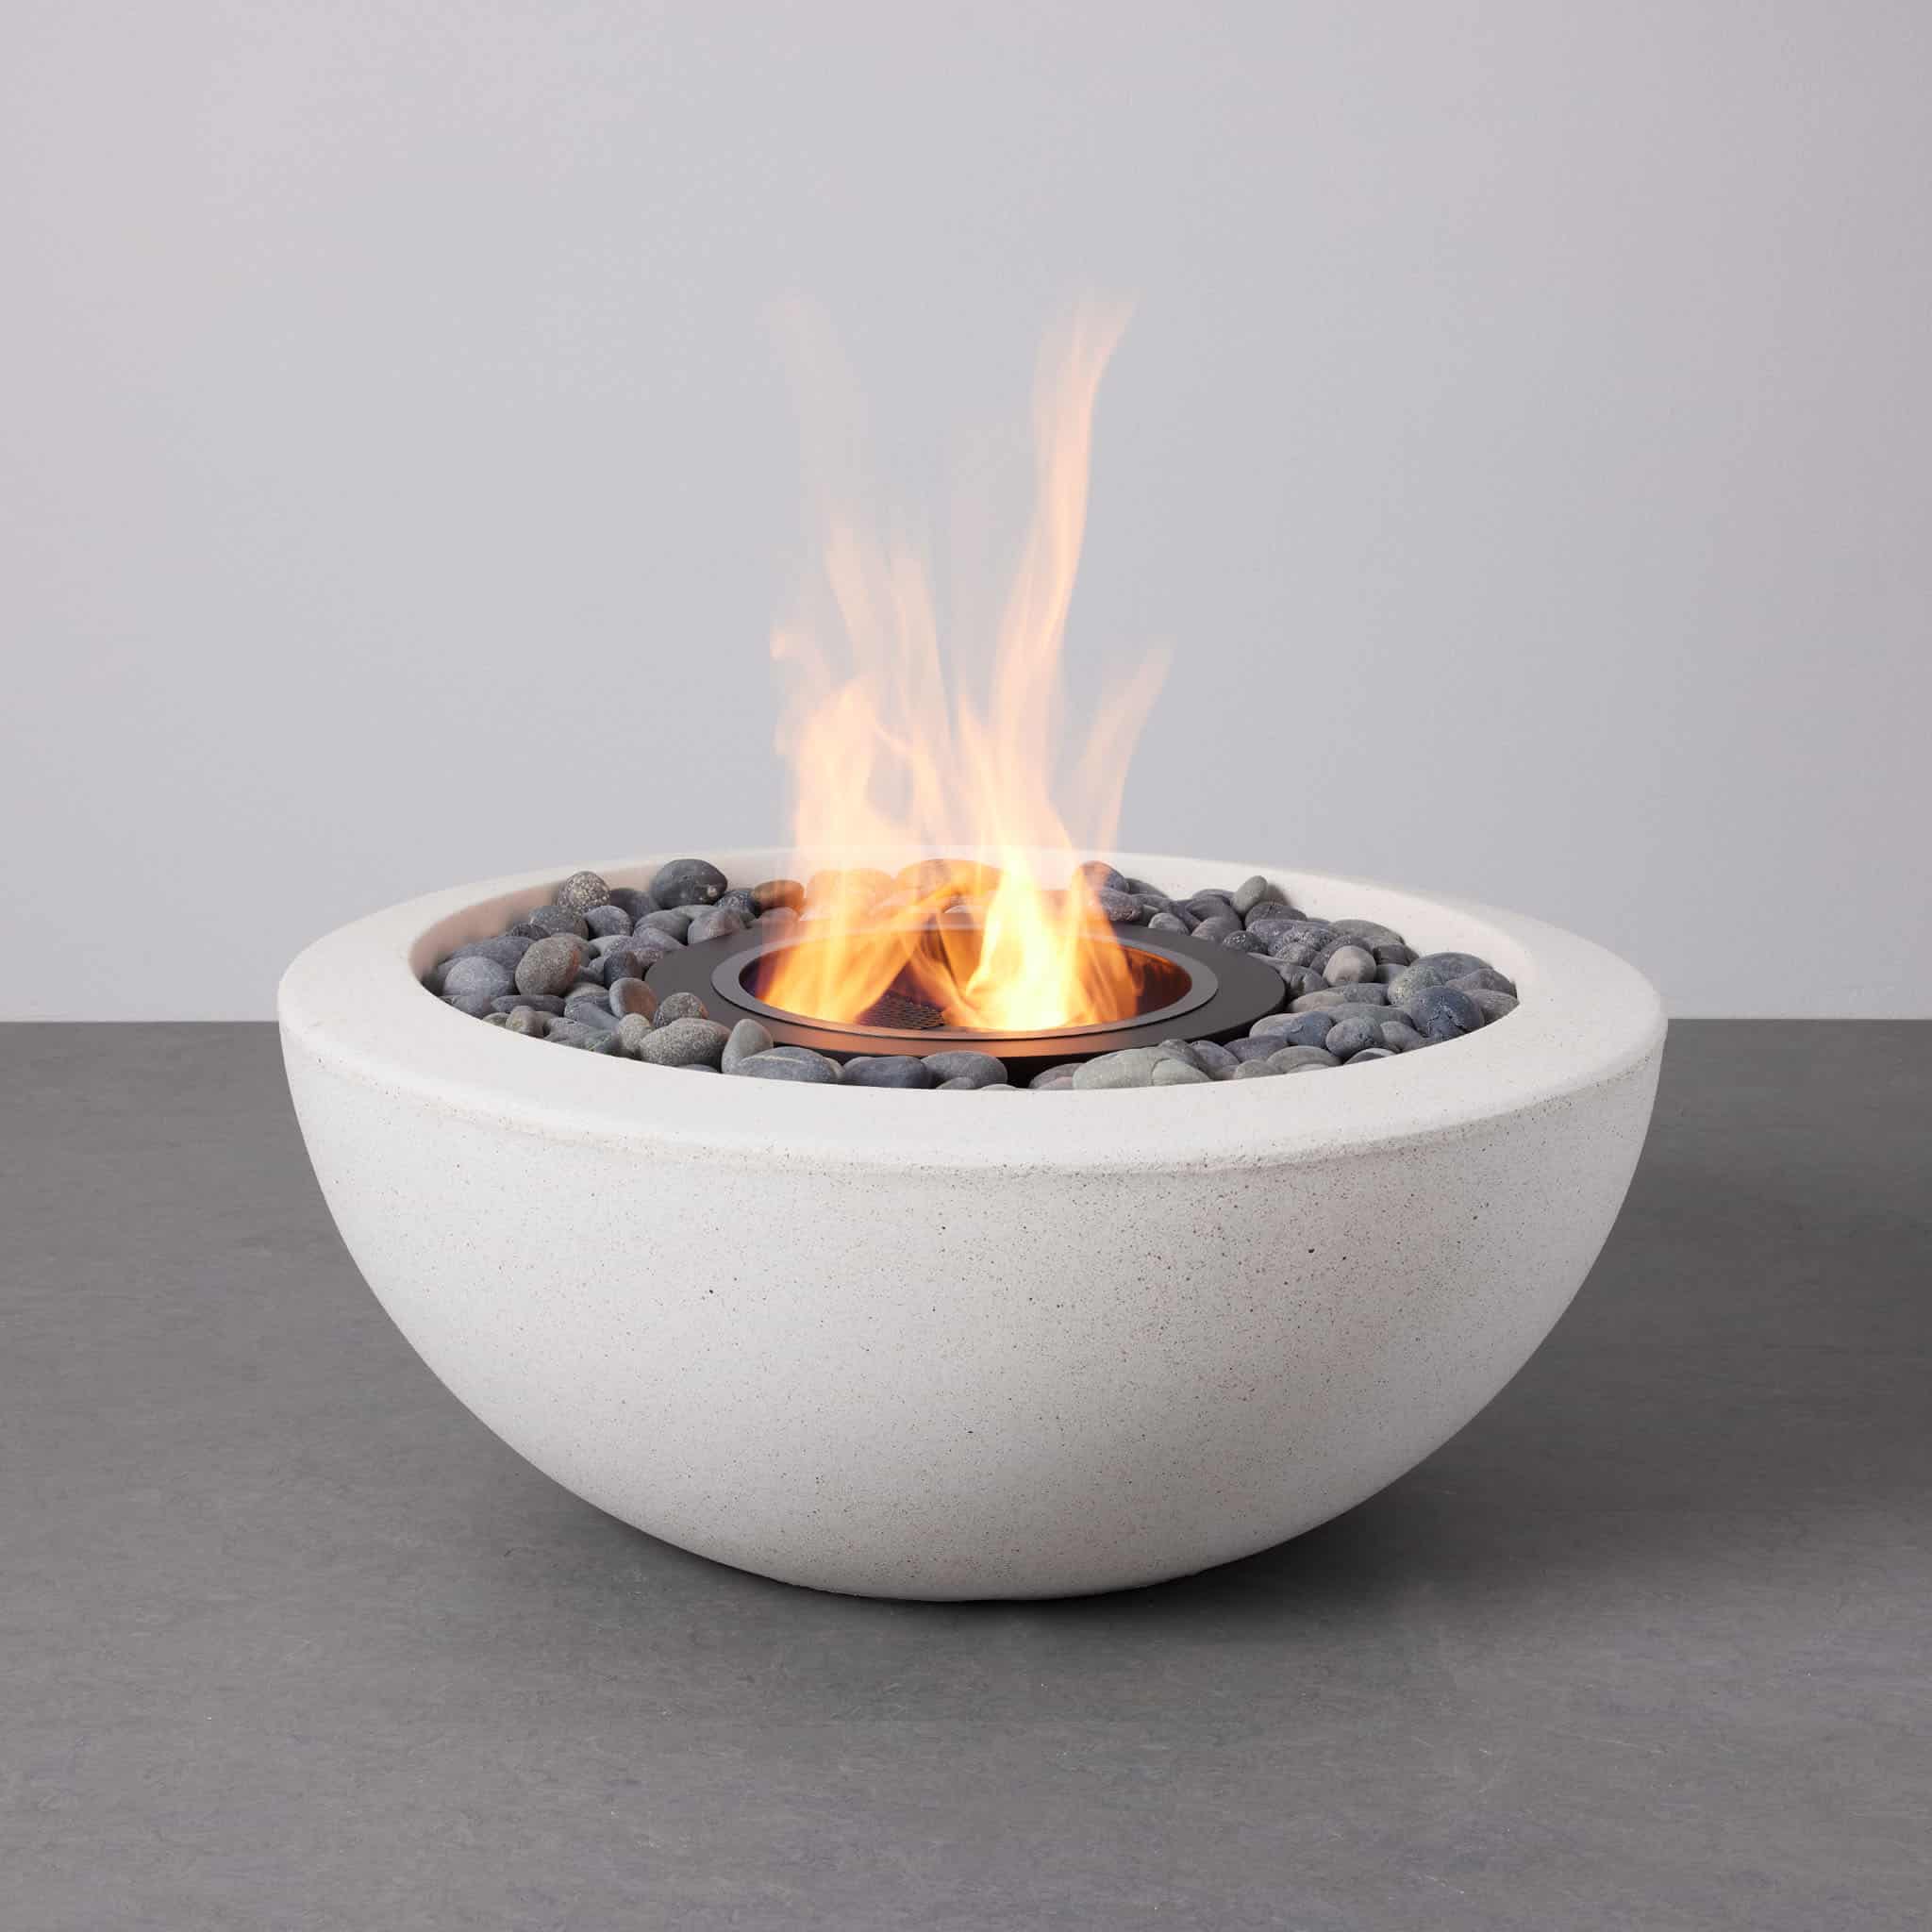 Lara 20 in. x 7 in. x 8.1 in. Rectangle Table Top Fire Bowl